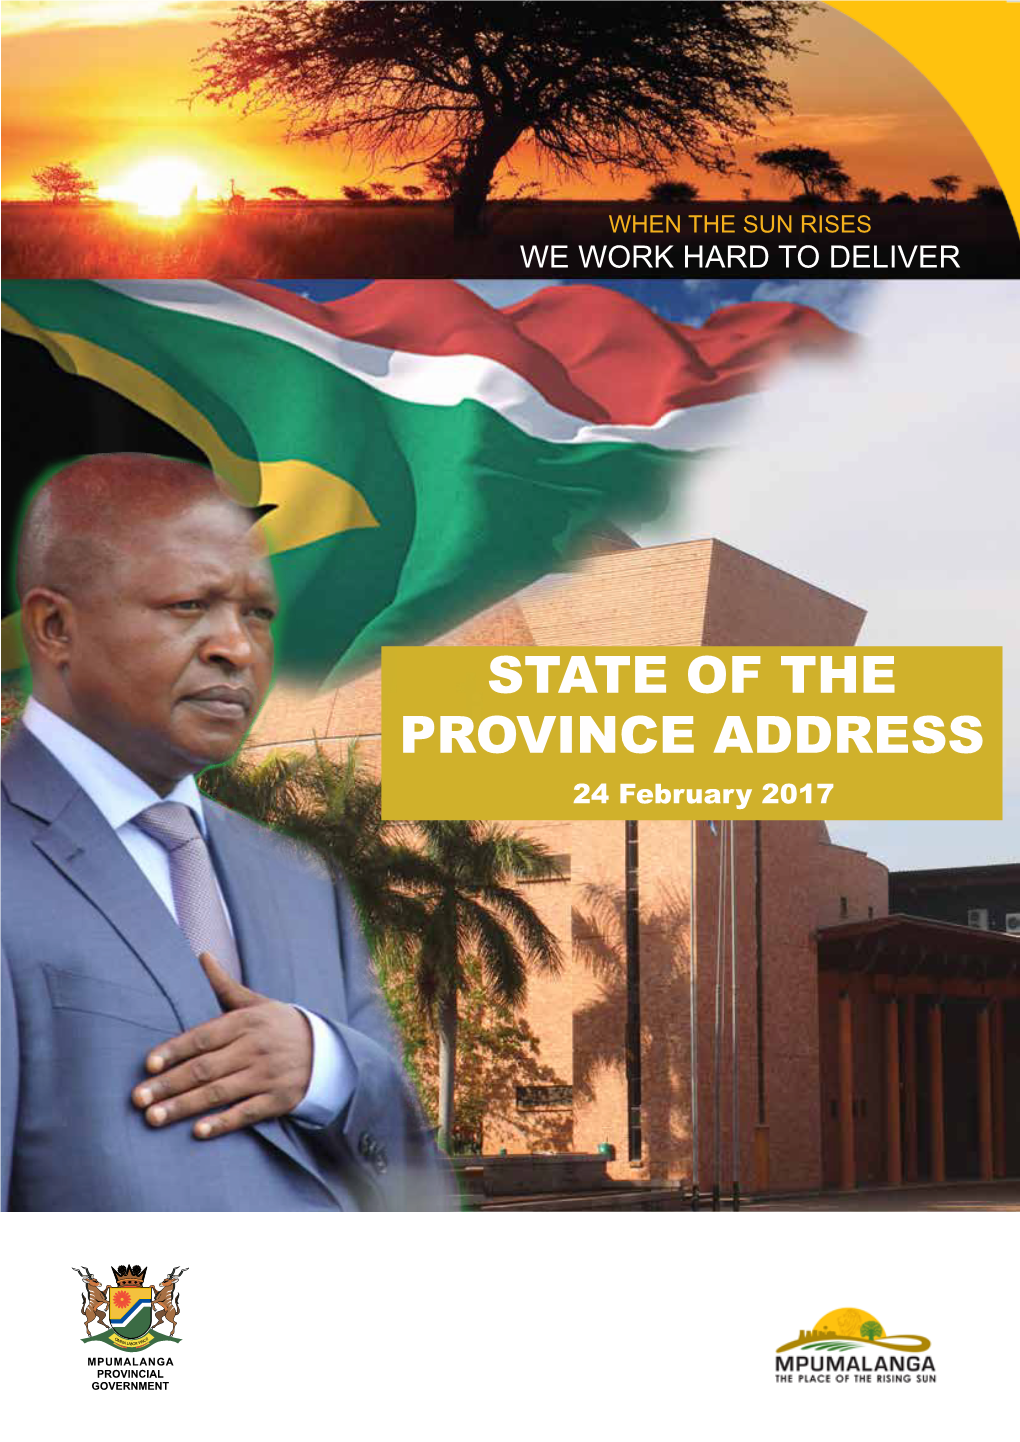 State of the Province Address by Hon. Premier DD Mabuza